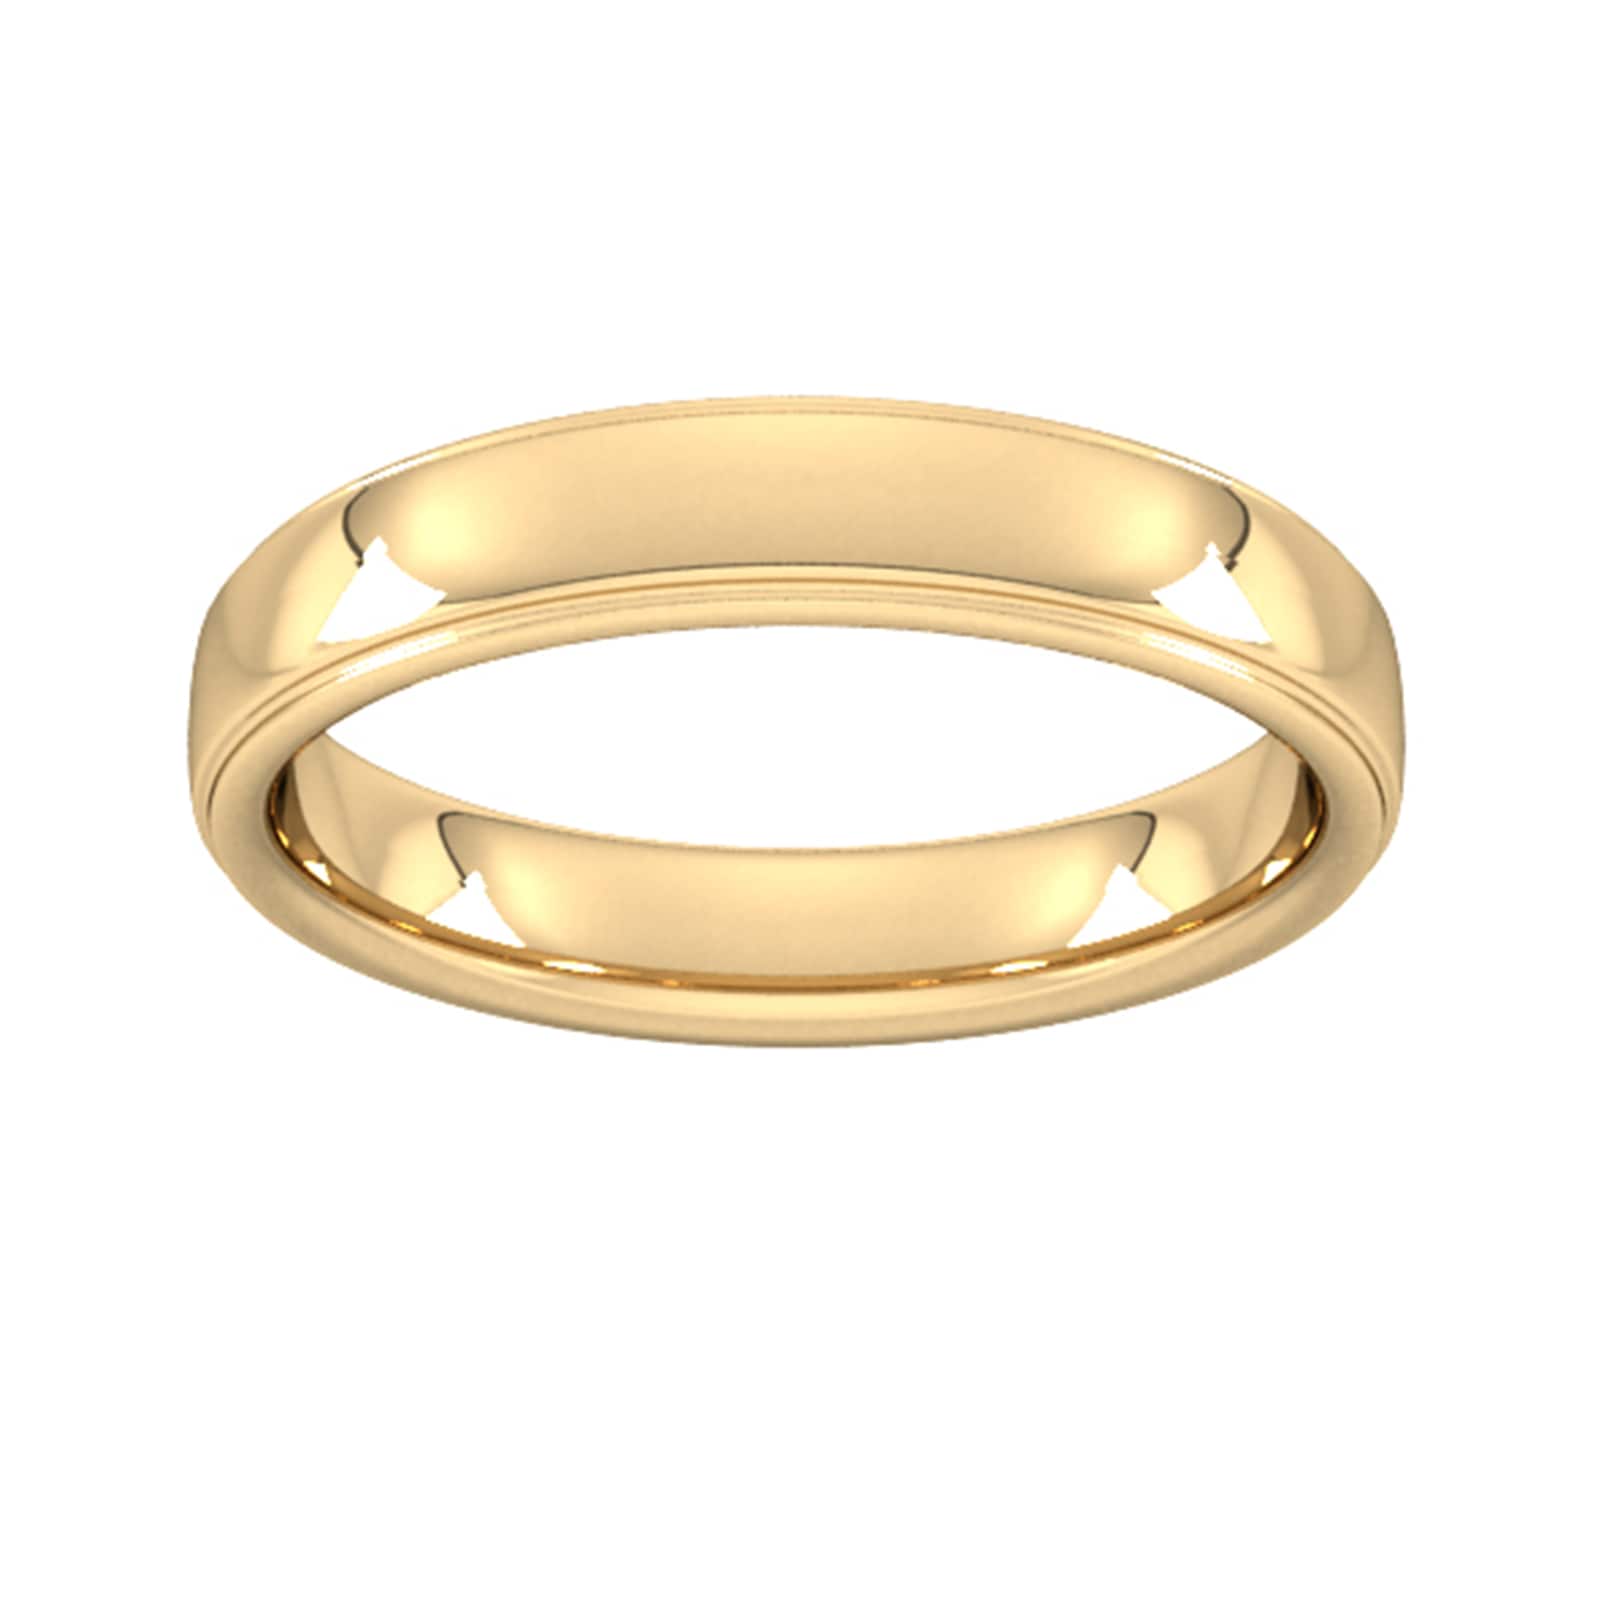 4mm Flat Court Heavy Polished Finish With Grooves Wedding Ring In 9 Carat Yellow Gold - Ring Size O